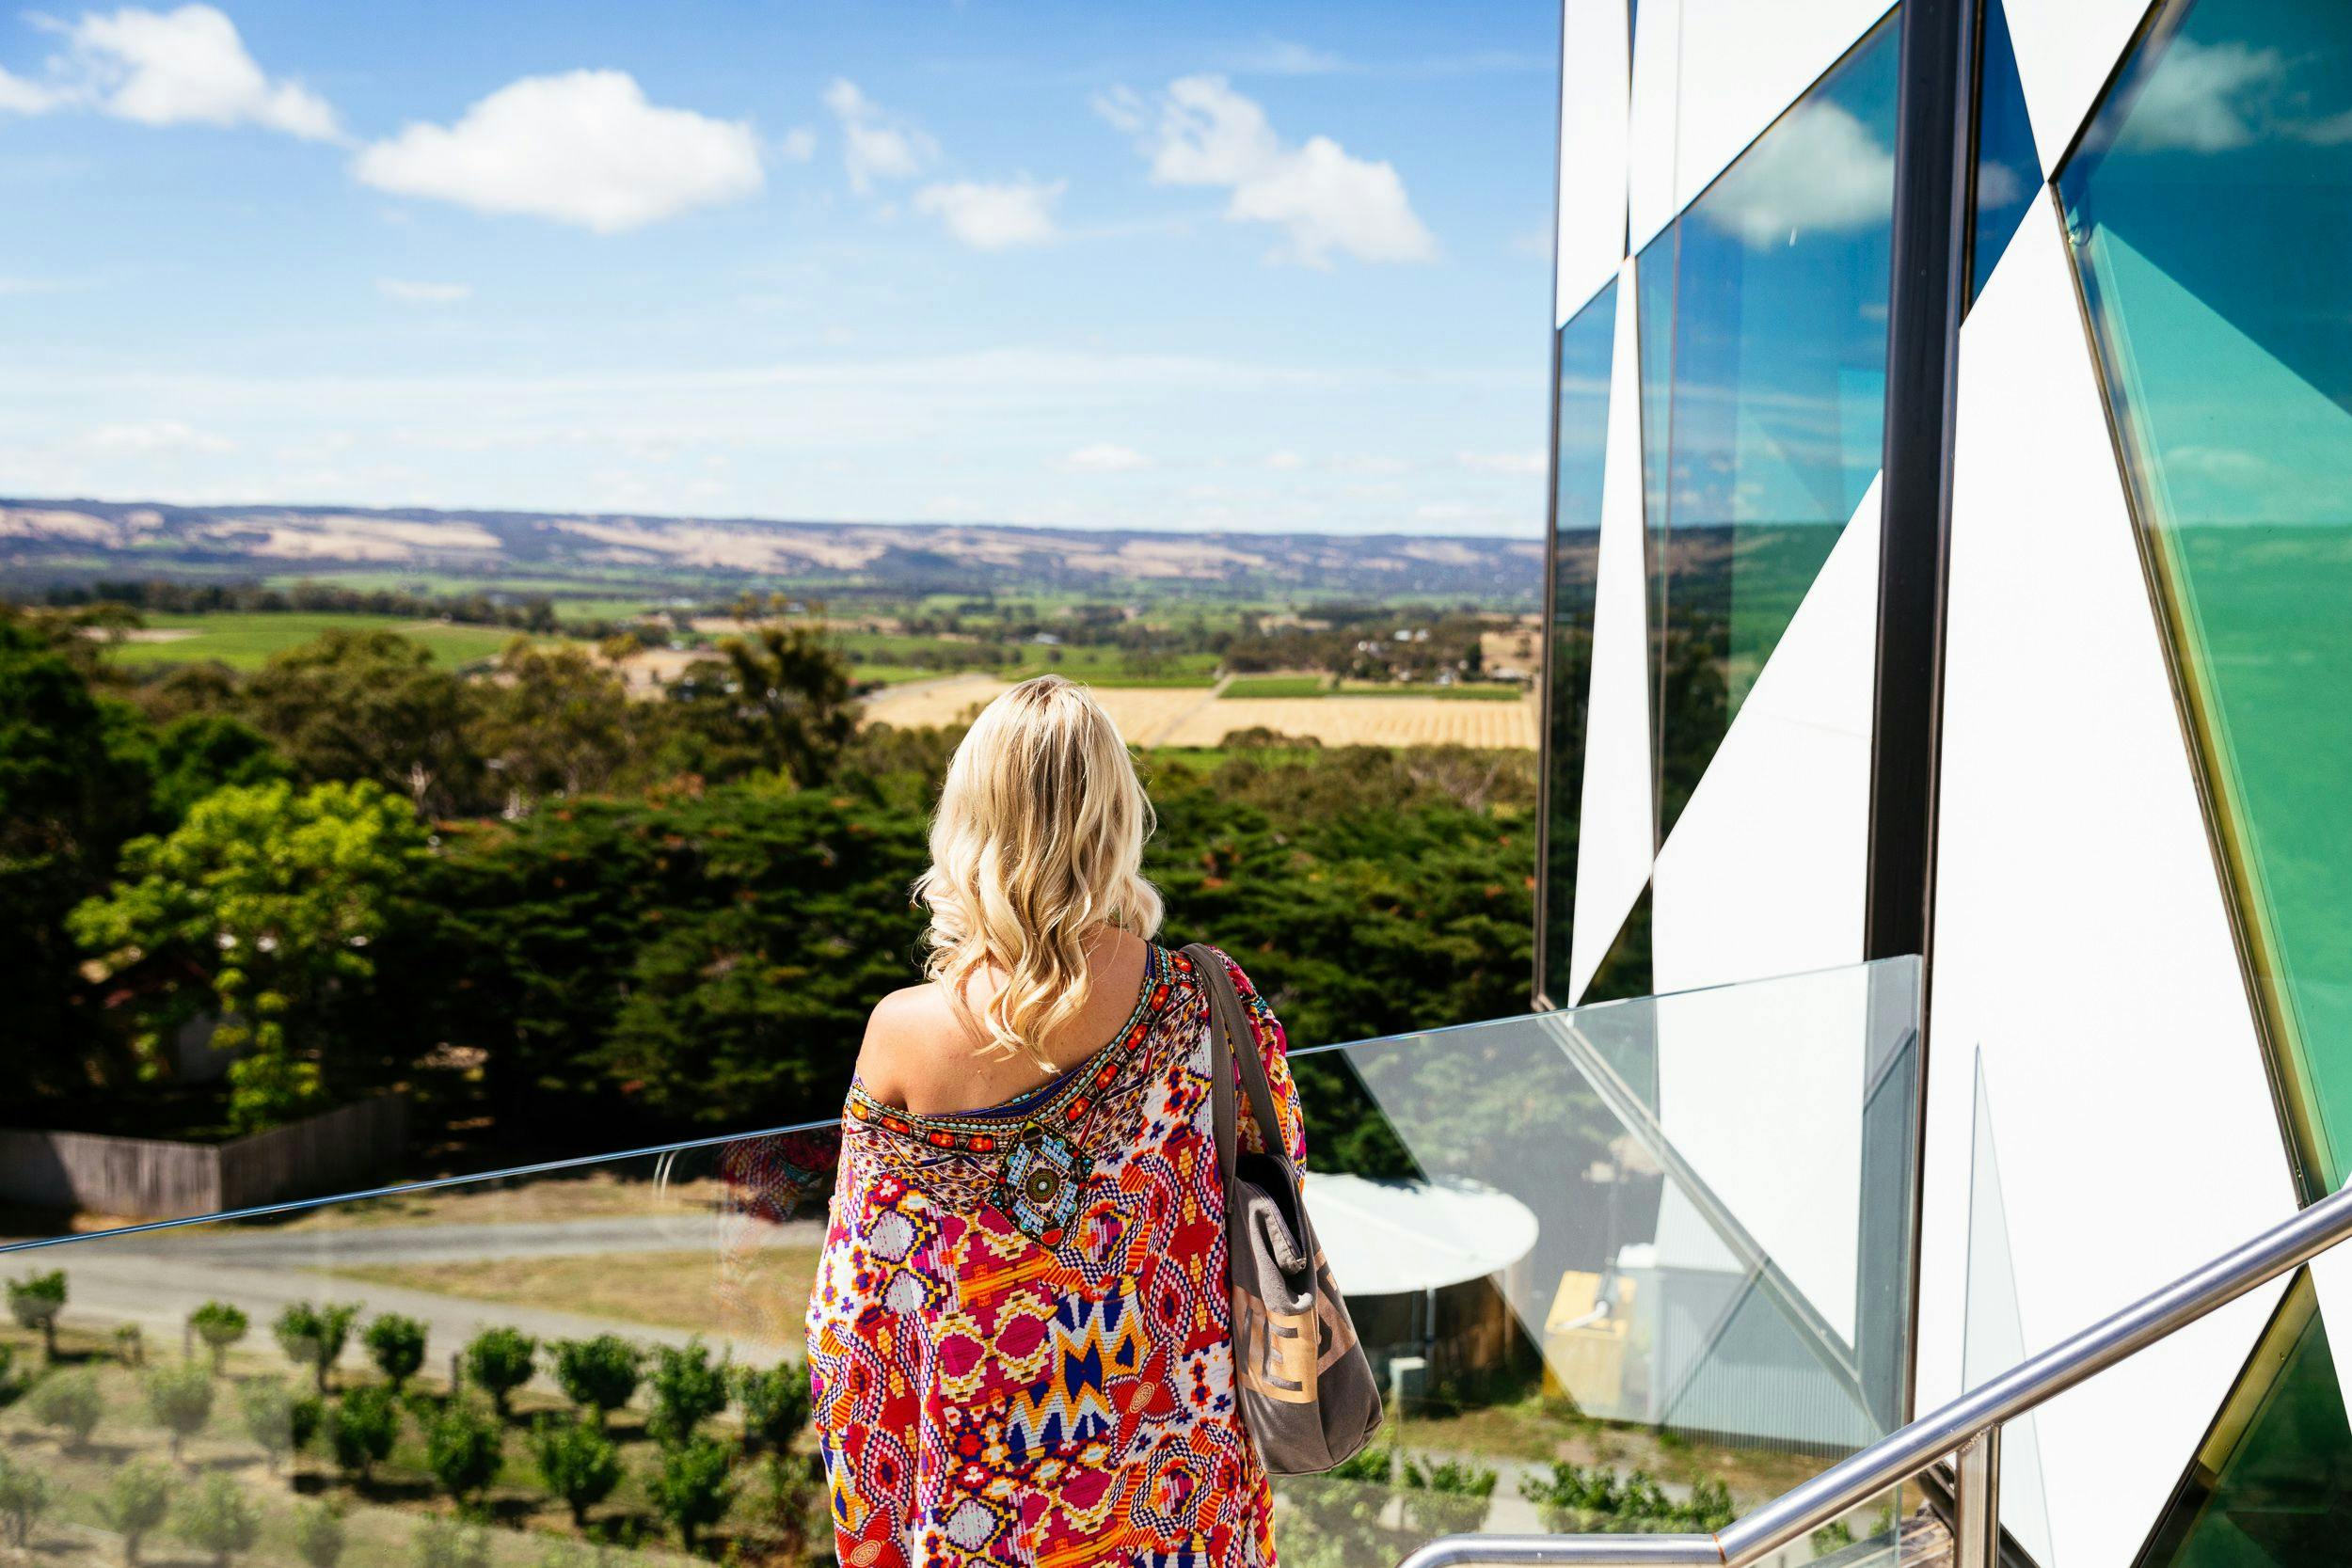 Adelaide's McLaren Vale and The Cube experience